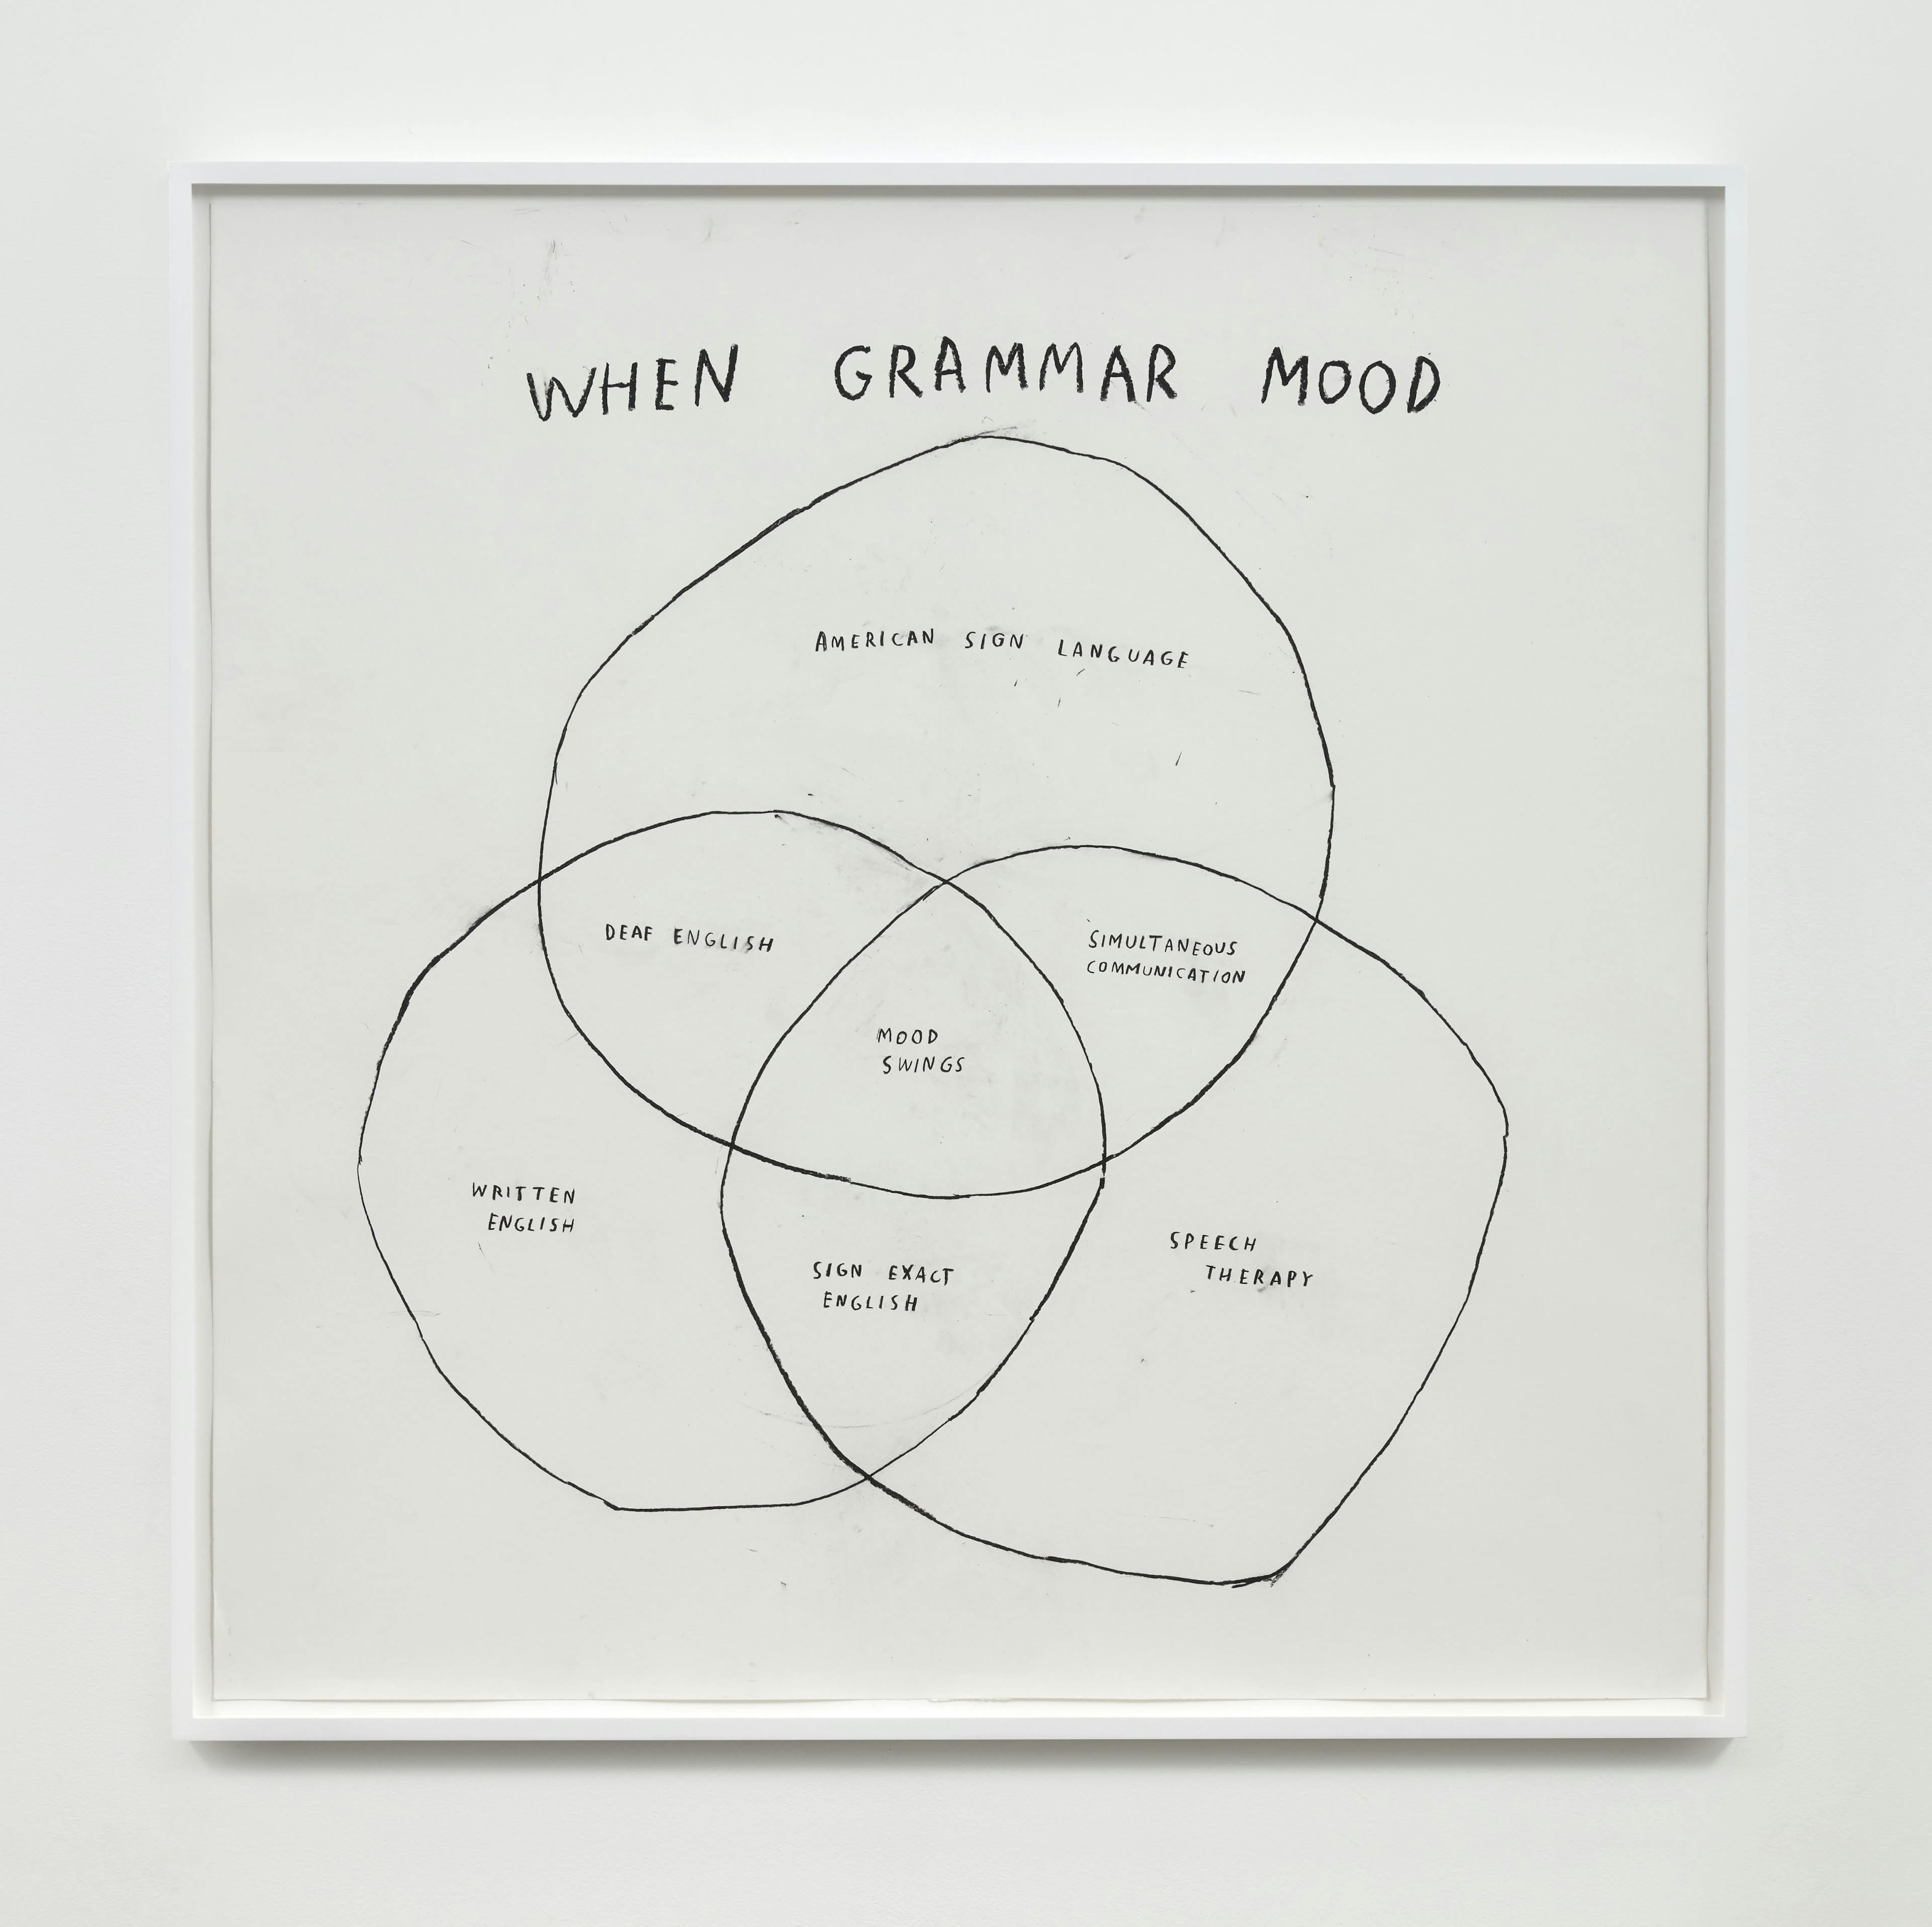 A large pencil drawing depicting a venn diagram with three overlapping circles. “When Grammar Mood” is written along the top of the diagram in block text.